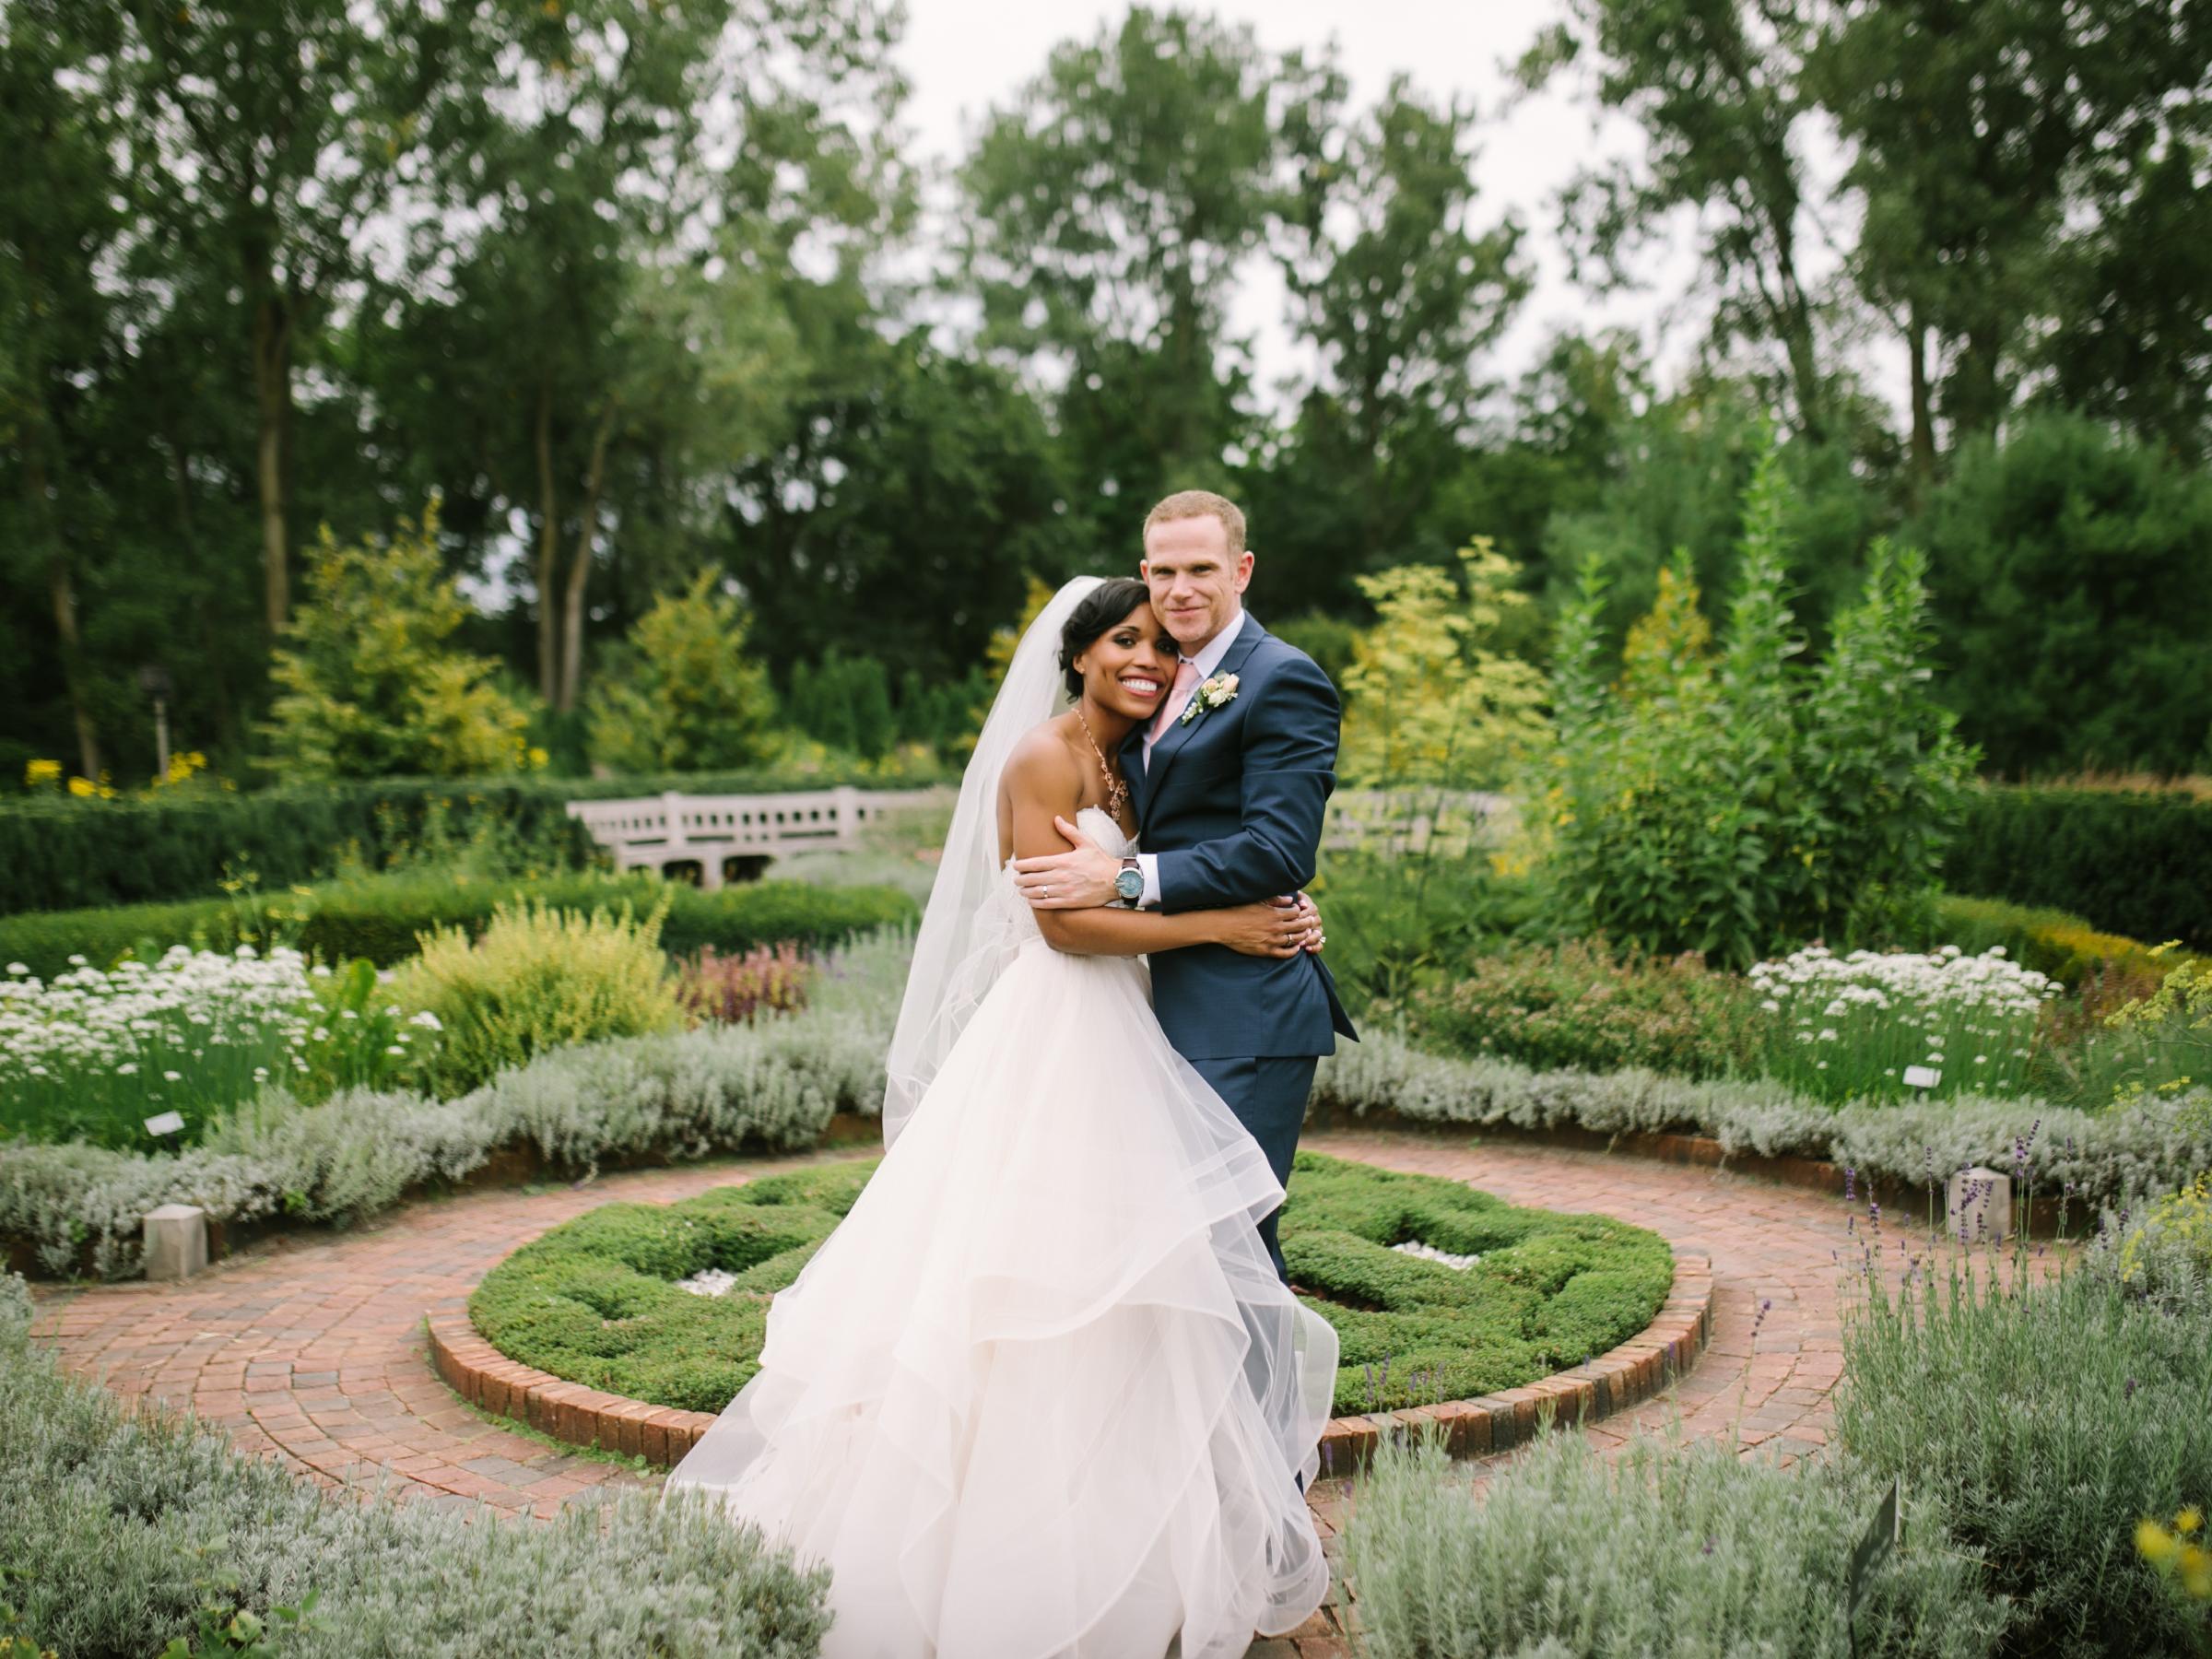 two people in wedding clothes embrace in herb knot garden